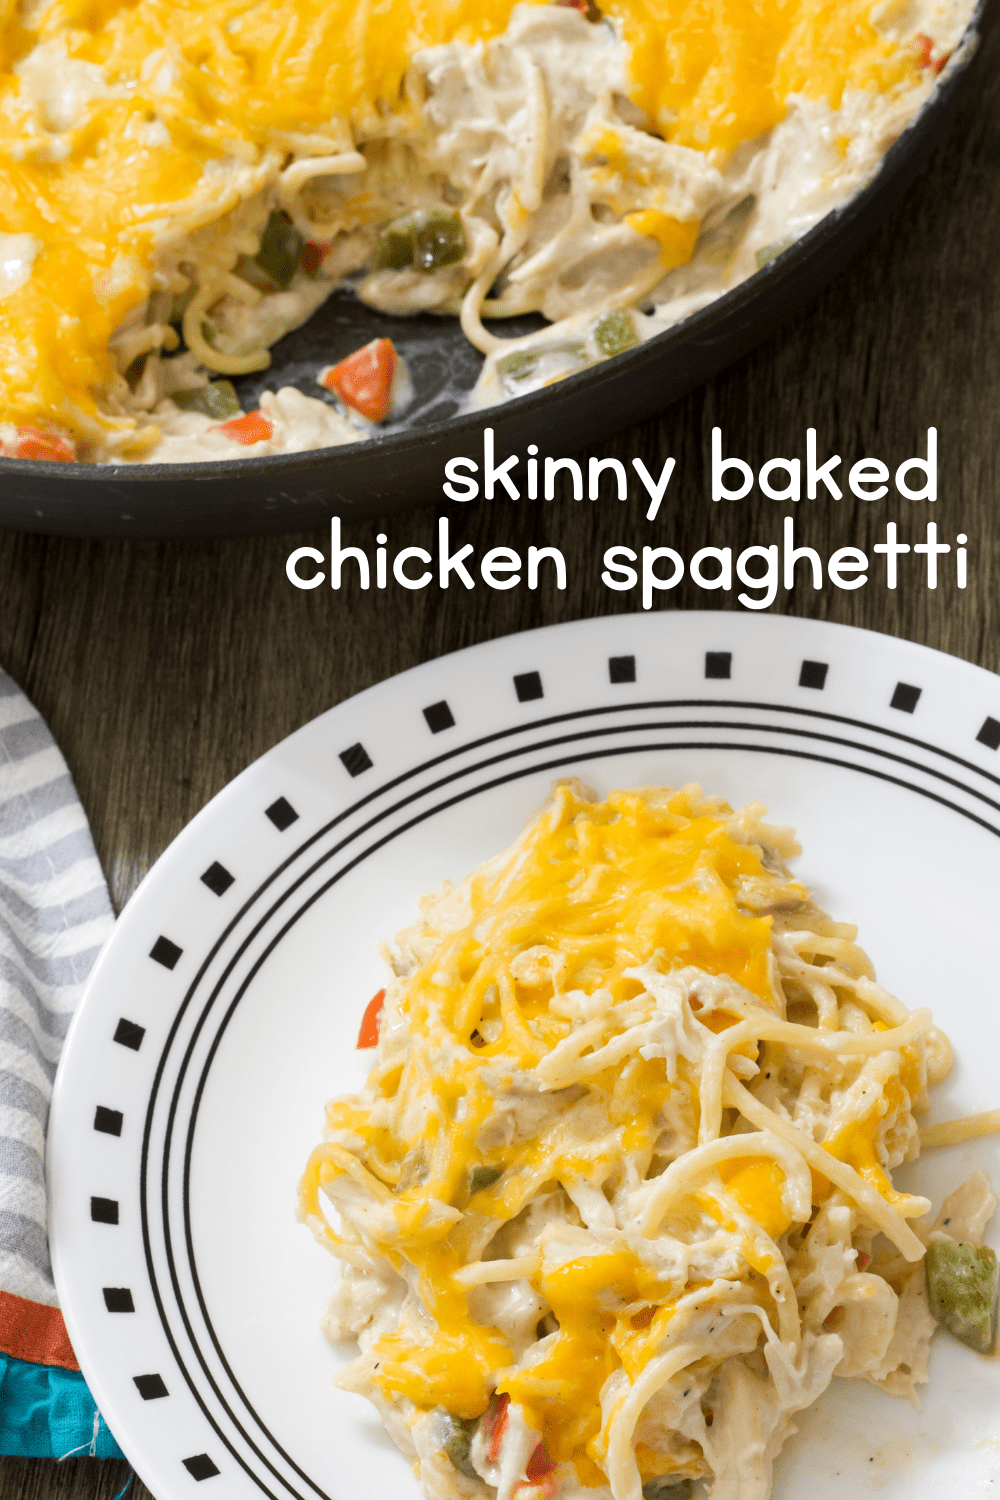 Skinny Baked Chicken Spaghetti - tender chicken and spaghetti in a cream cheese sauce is baked in the oven and topped with cheddar cheese. #bakedspaghetti #chickenspaghetti #skinnyrecipe #healthierrecipe #lightenedupchickenspaghetti #heallthybakedspaghetti